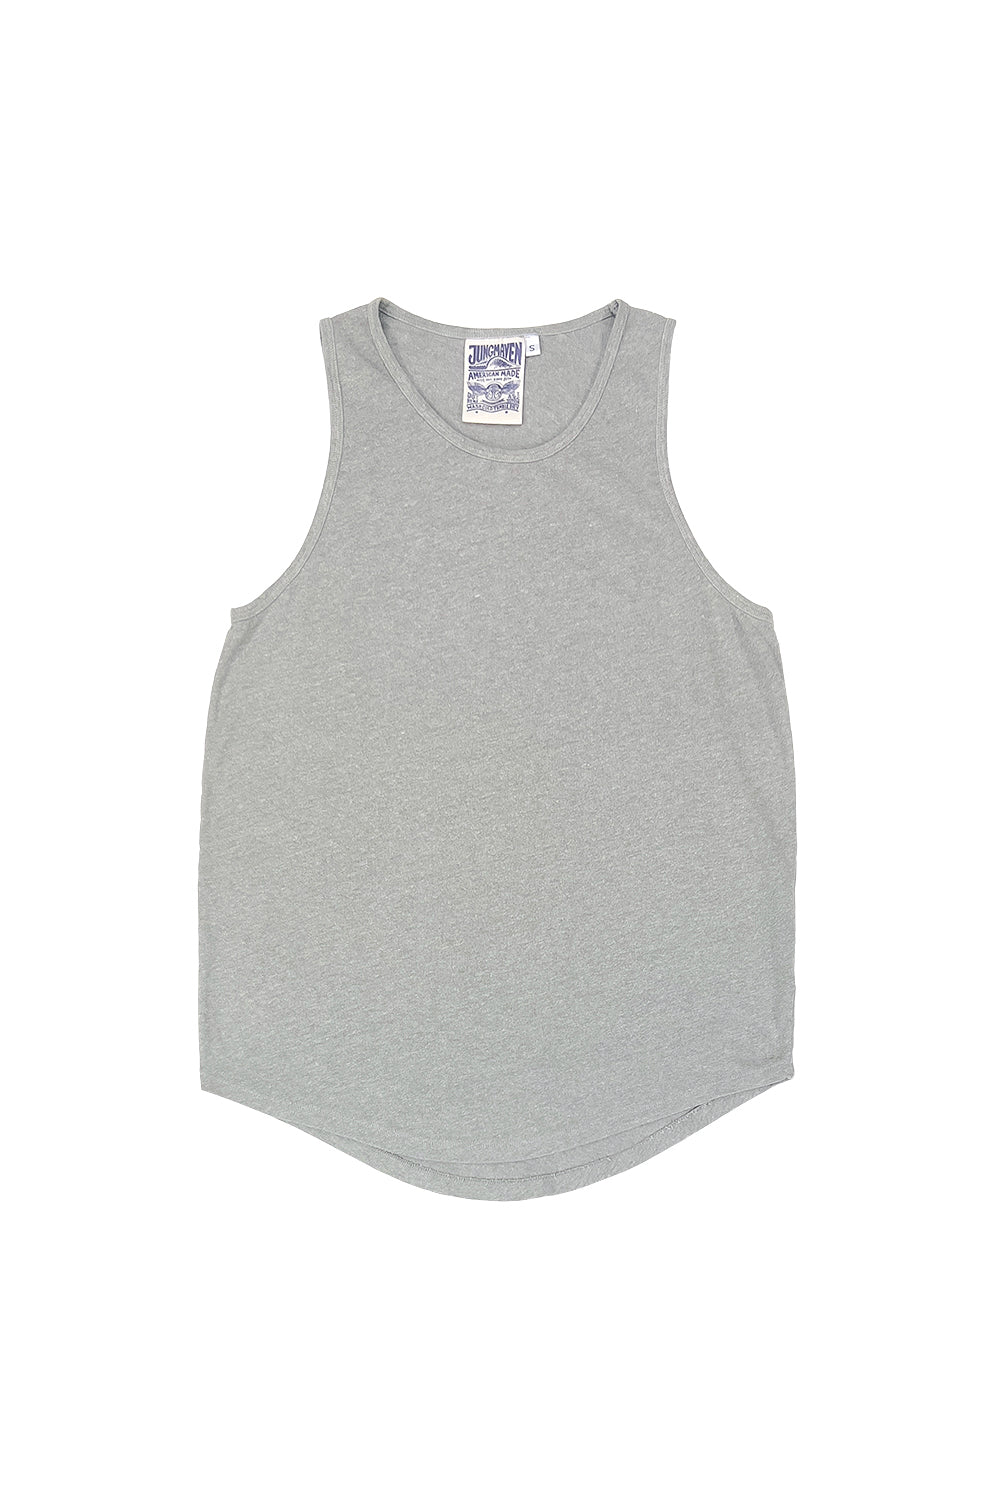 Heathered Tank Top | Jungmaven Hemp Clothing & Accessories / Color: Athletic Gray